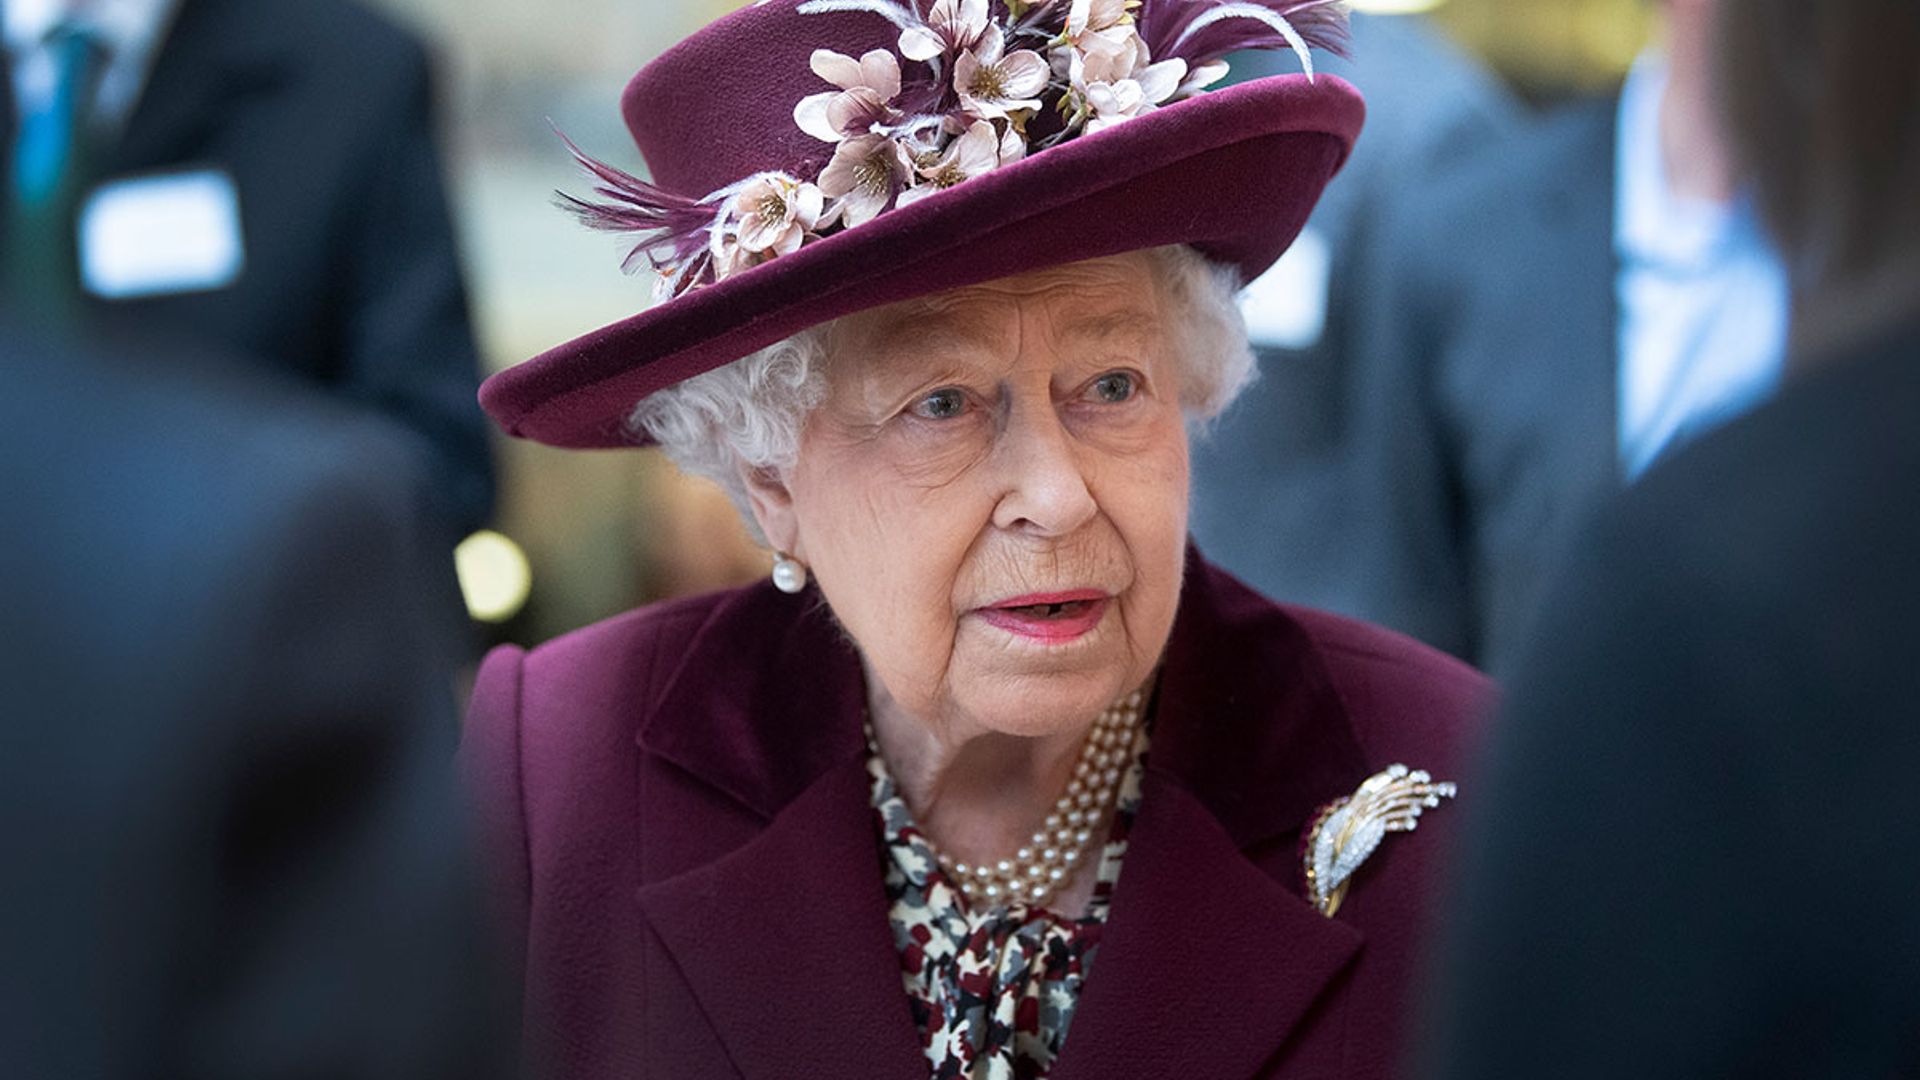 queen-royal-windsor-horse-show-cancelled